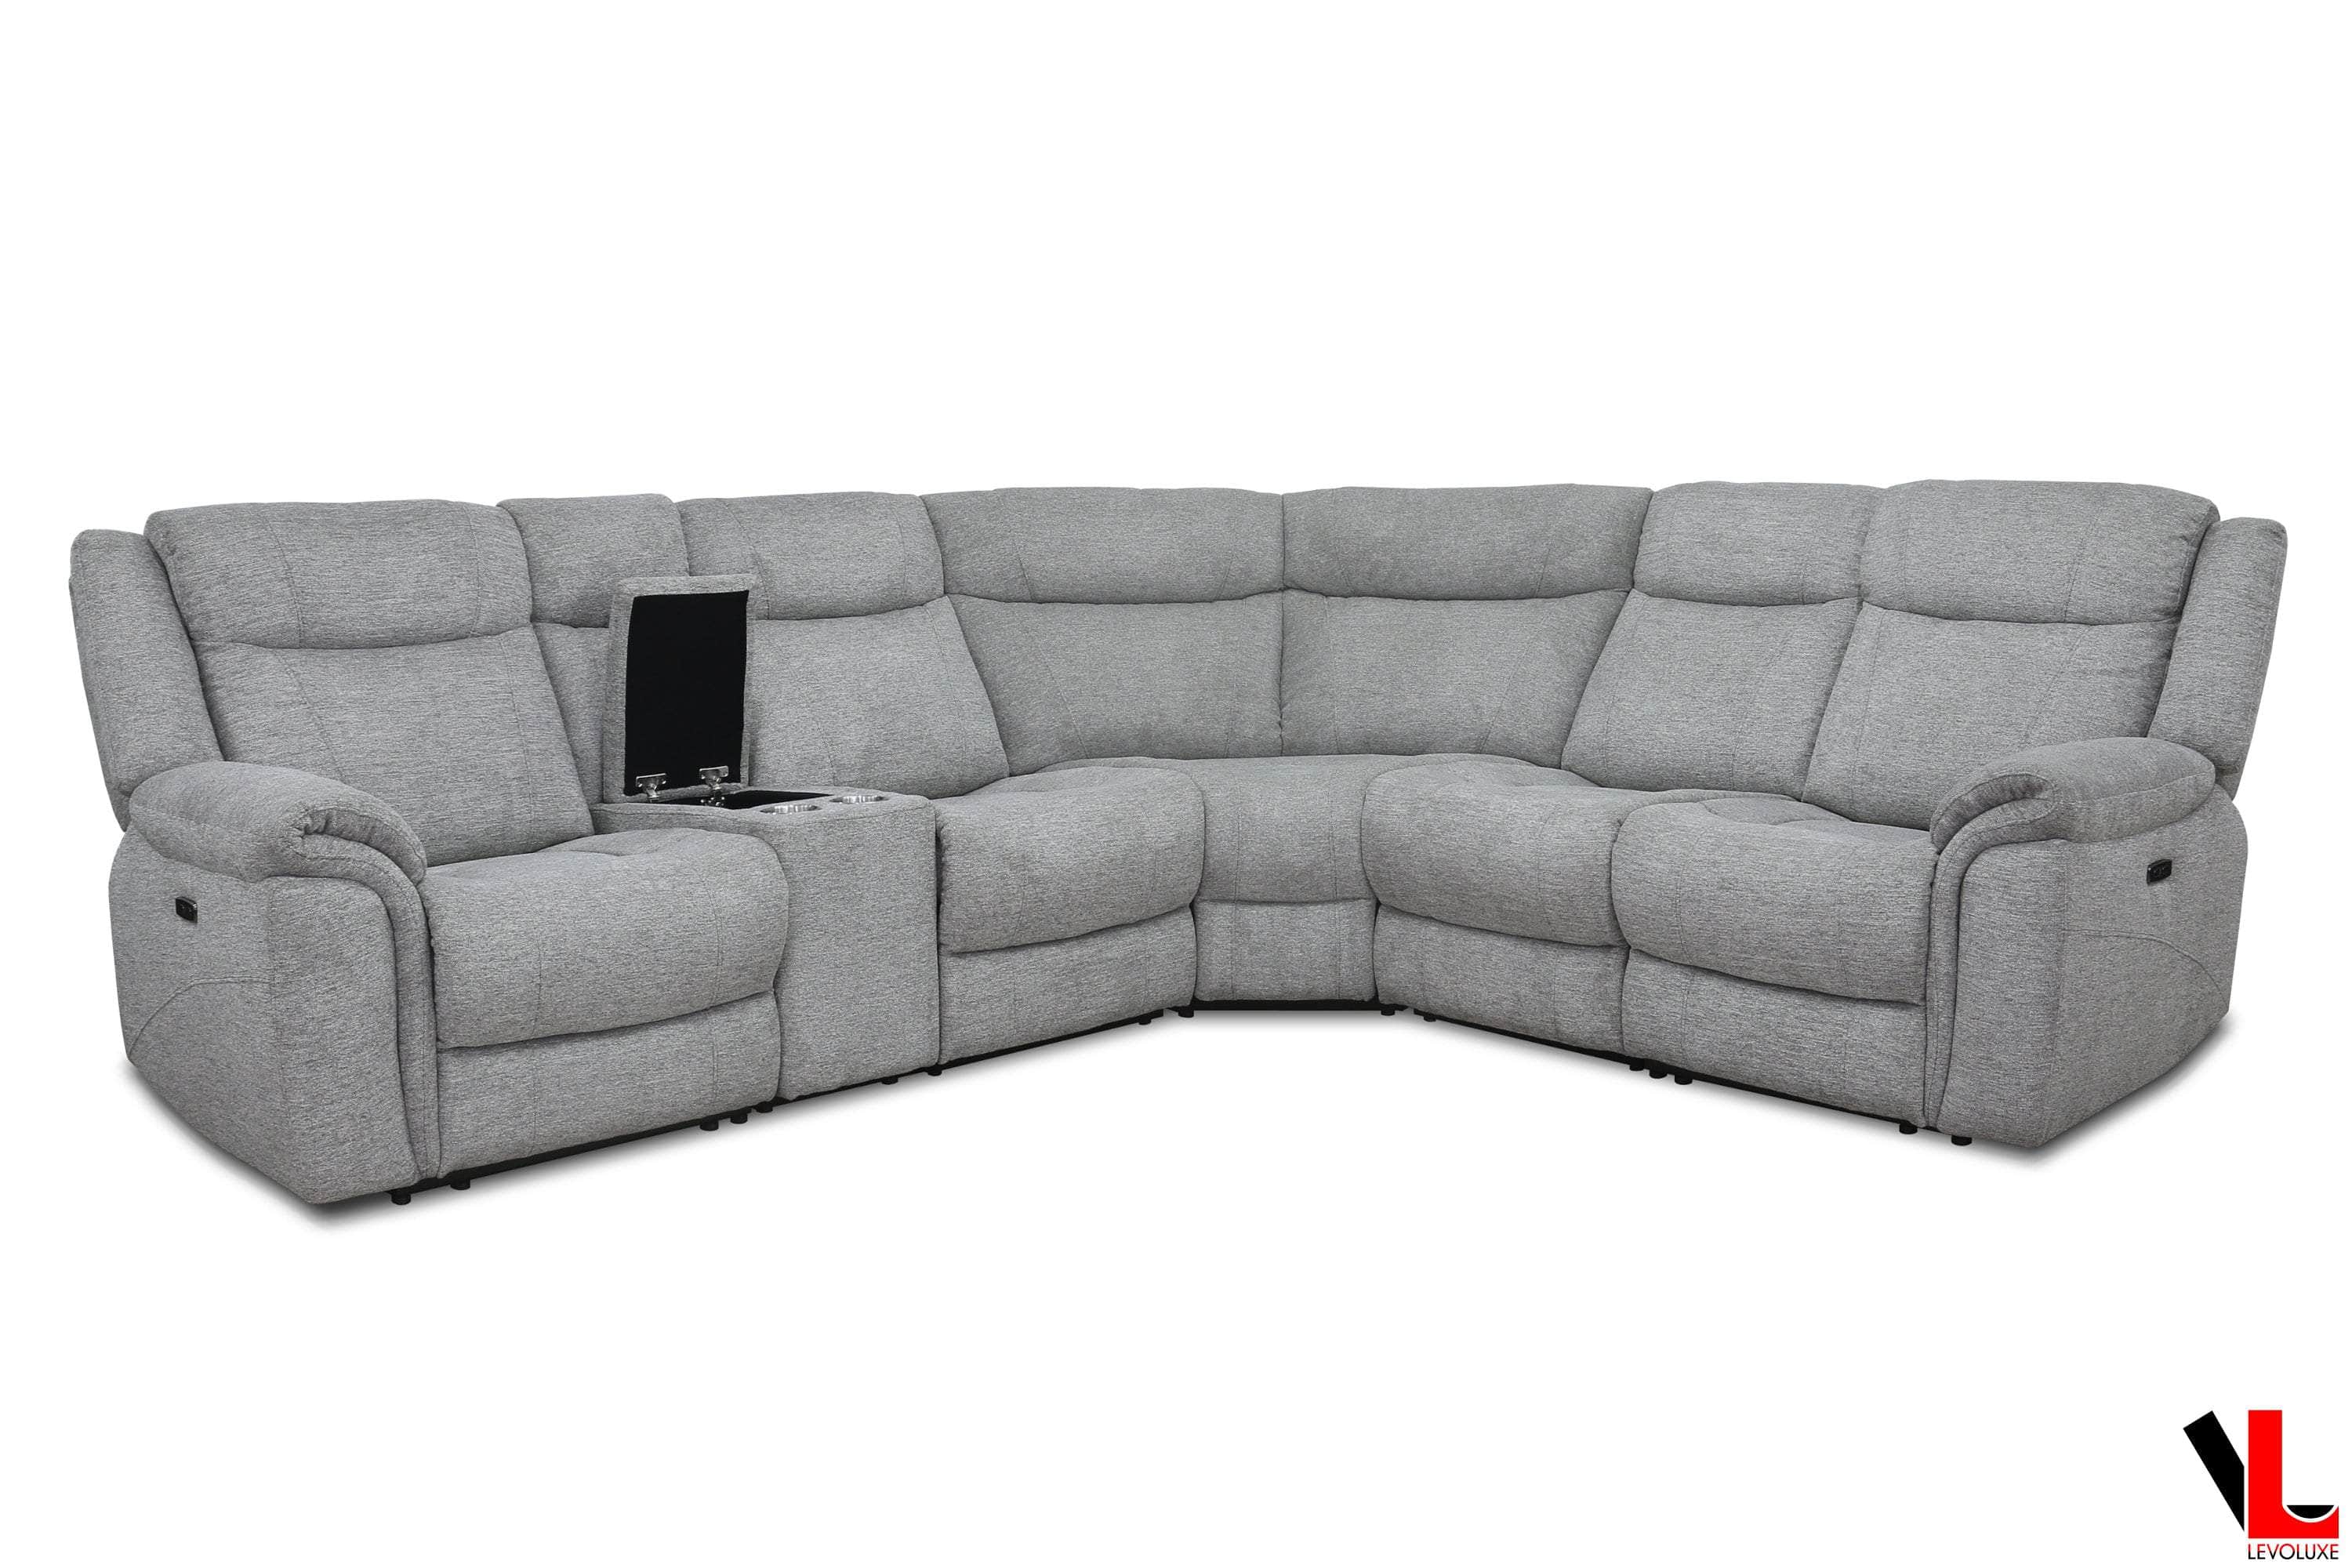 Levoluxe Sectional Braun Corner Sectional Sofa with Console, Power Recliners, and Power Headrests in Tweed Ash Fabric